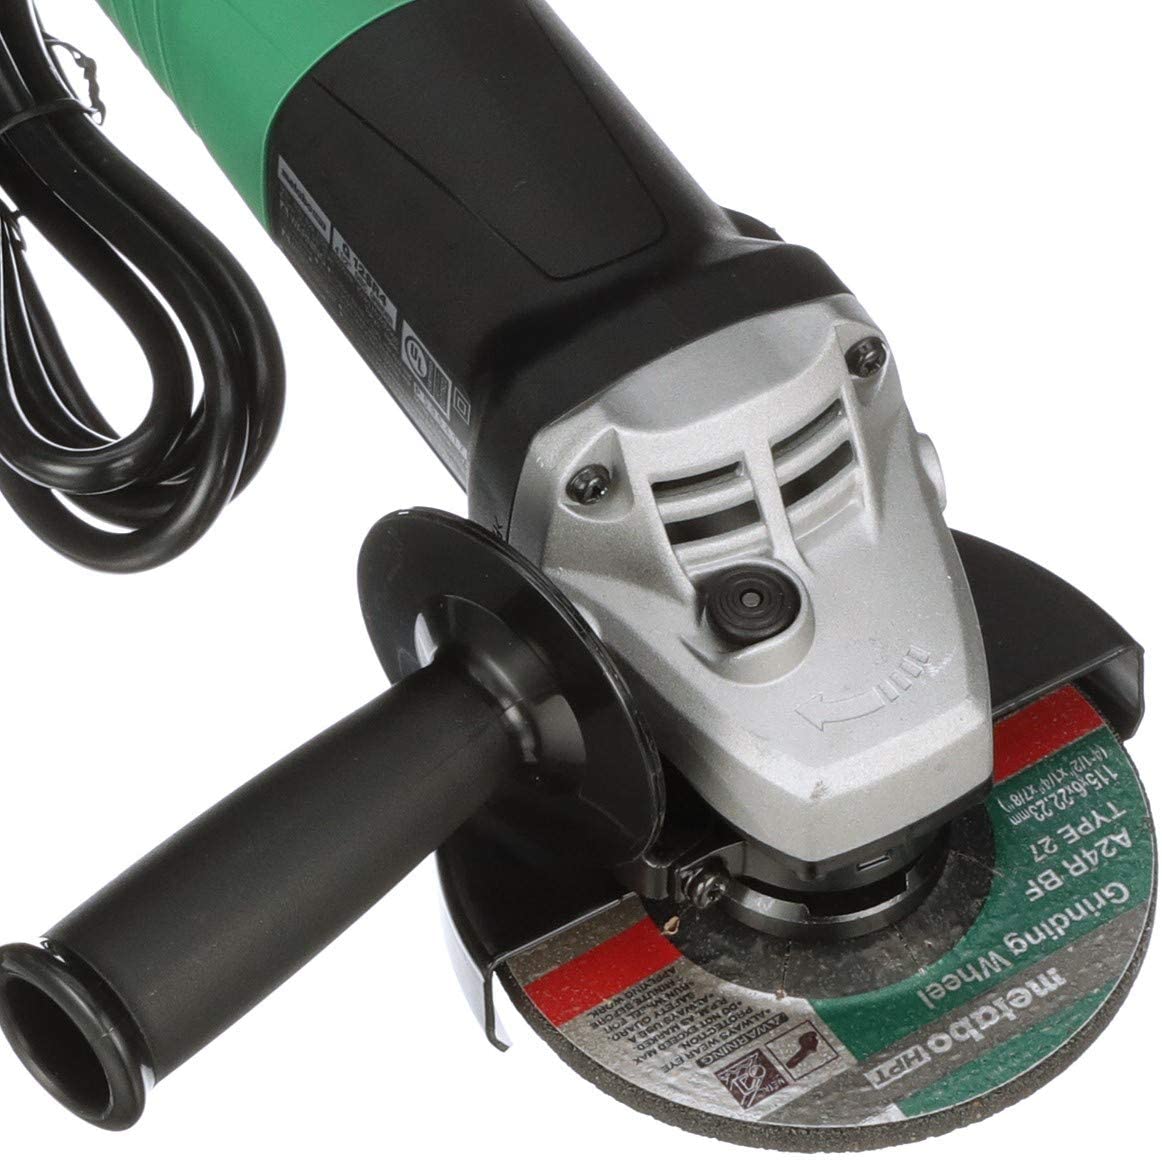 Buy Metabo HPT Angle Grinder | 4-1/2-Inch | Includes 5 Grinding Wheels &  Hard Case | 6.2-Amp Motor | Compact & Lightweight | G12SR4 Online in  Hungary. B07L21GNHL